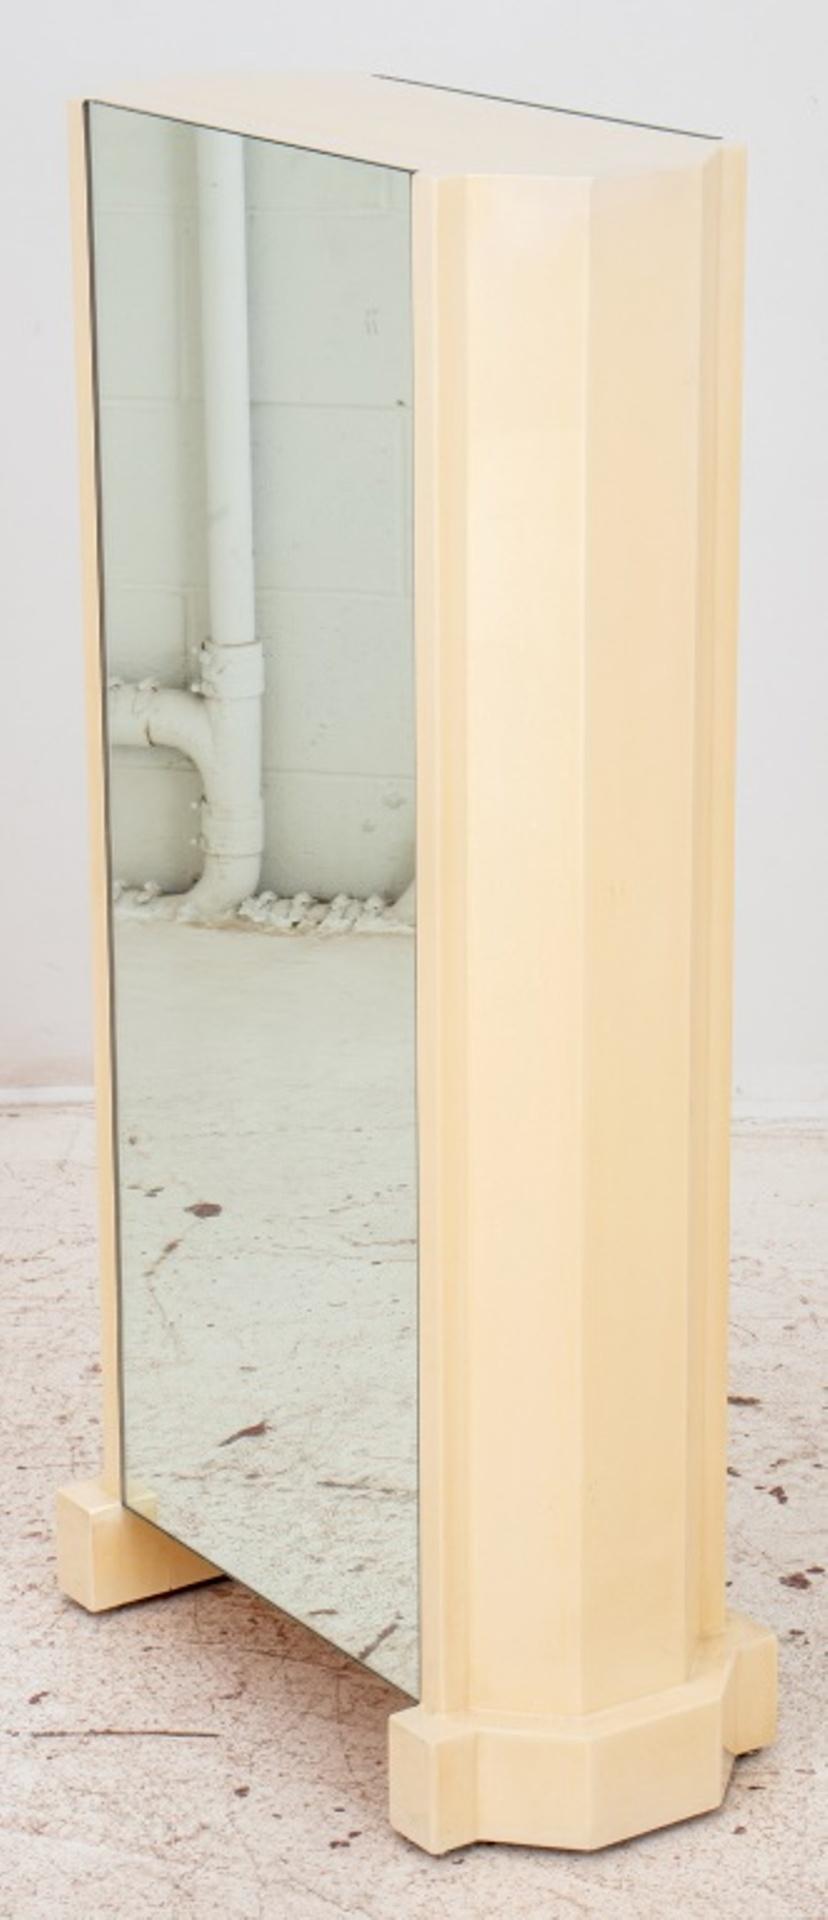 Hollywood Regency style cream lacquered pedestal having hexagonal skyscraper shape with mirrors on two sides. Measures: 42.5